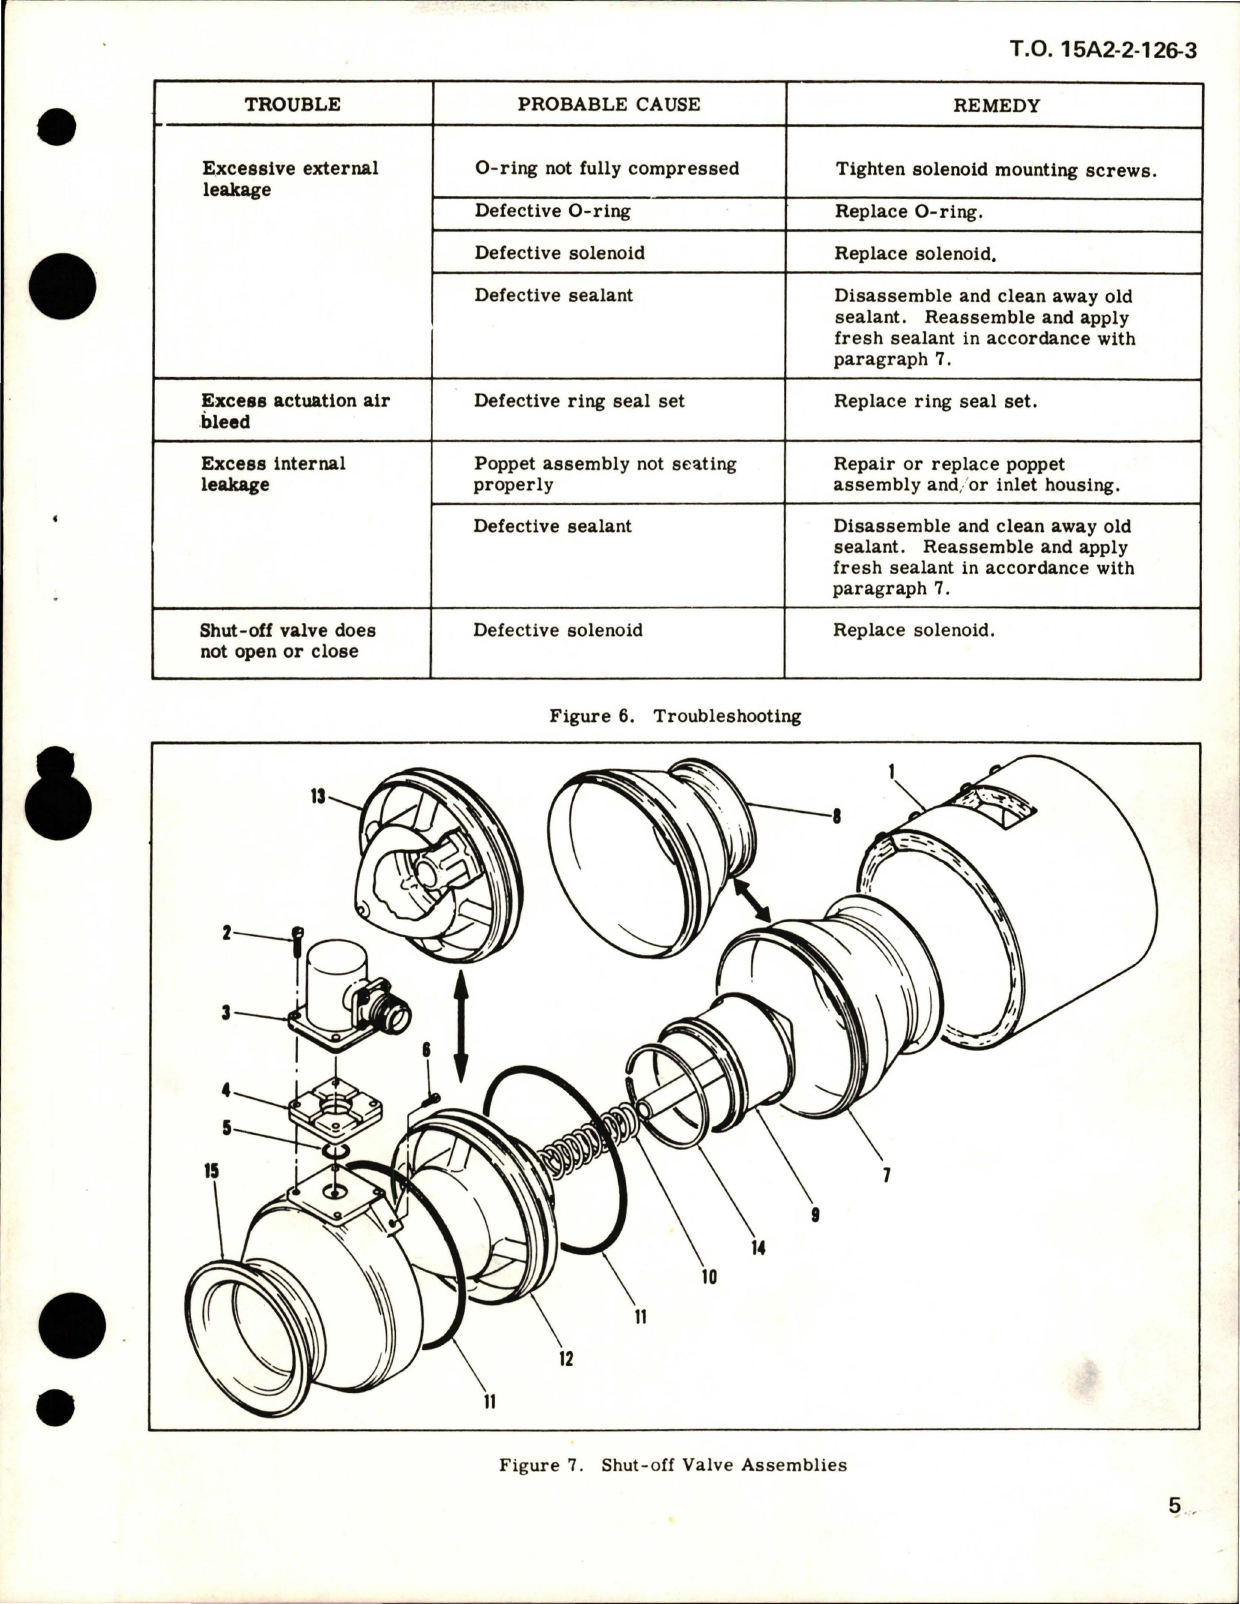 Sample page 5 from AirCorps Library document: Overhaul with Parts Breakdown for Shut Off Valve Assemblies - Parts 21021, 21020, 21021-1, 21020-1